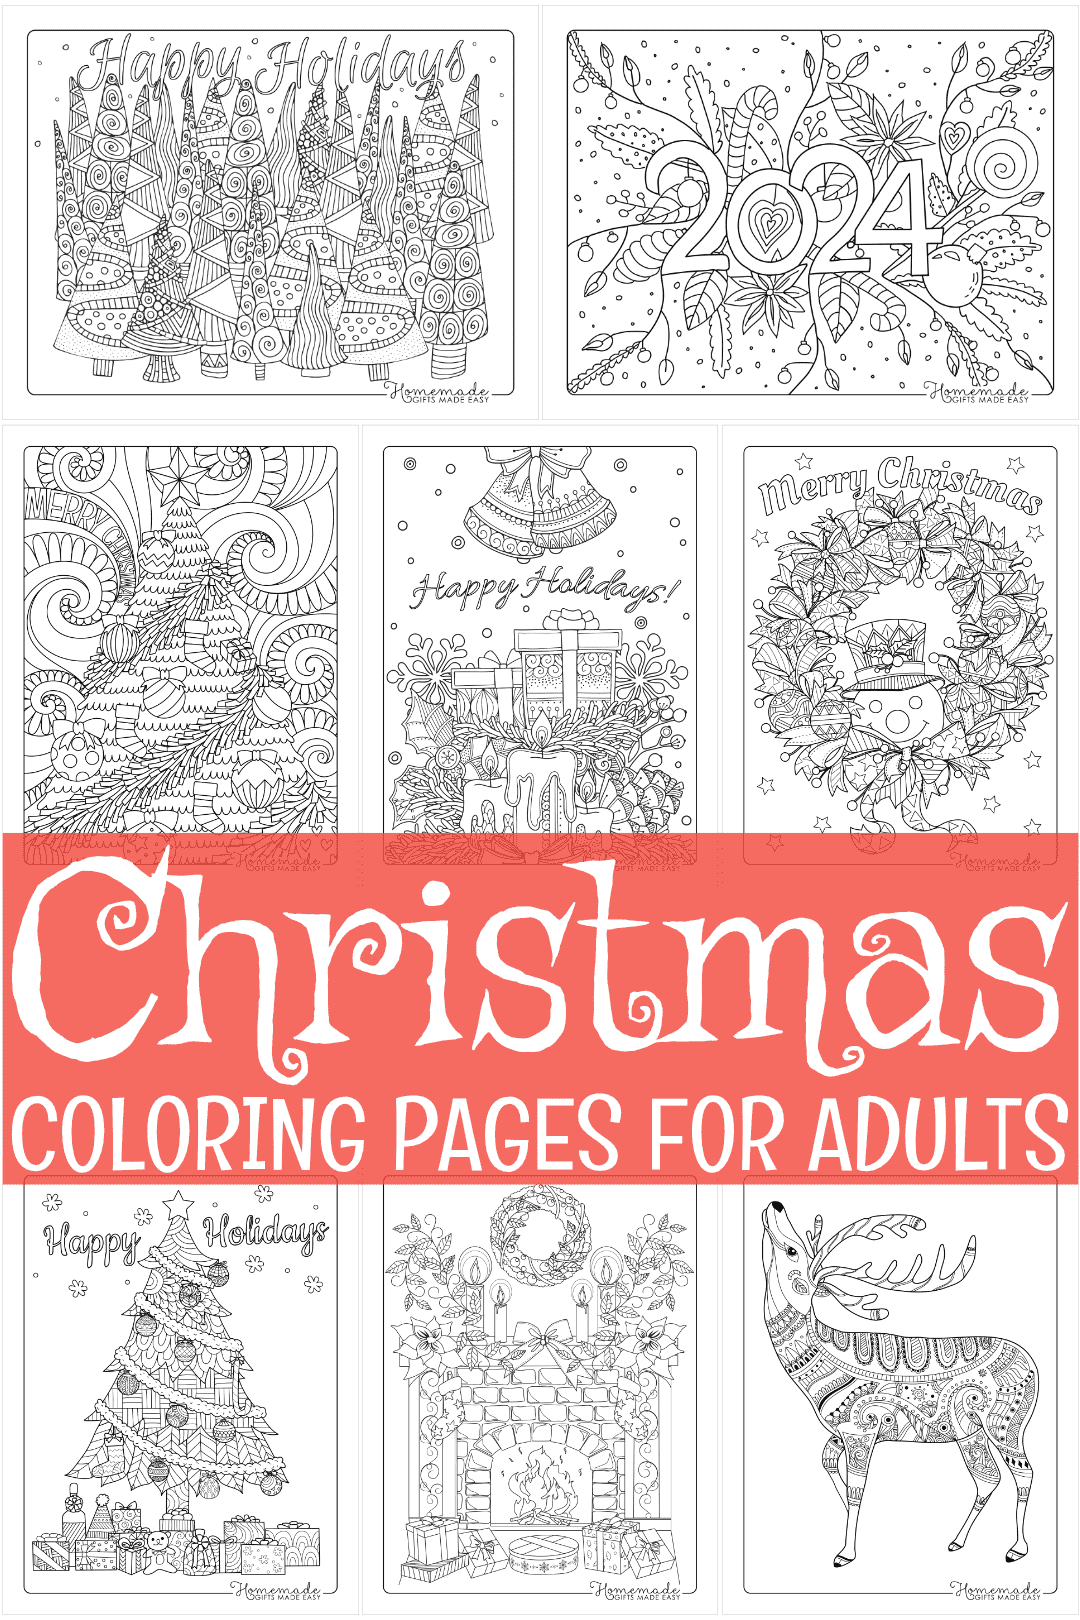 https://www.homemade-gifts-made-easy.com/image-files/christmas-coloring-pages-for-adults-montage-1080x1620.png